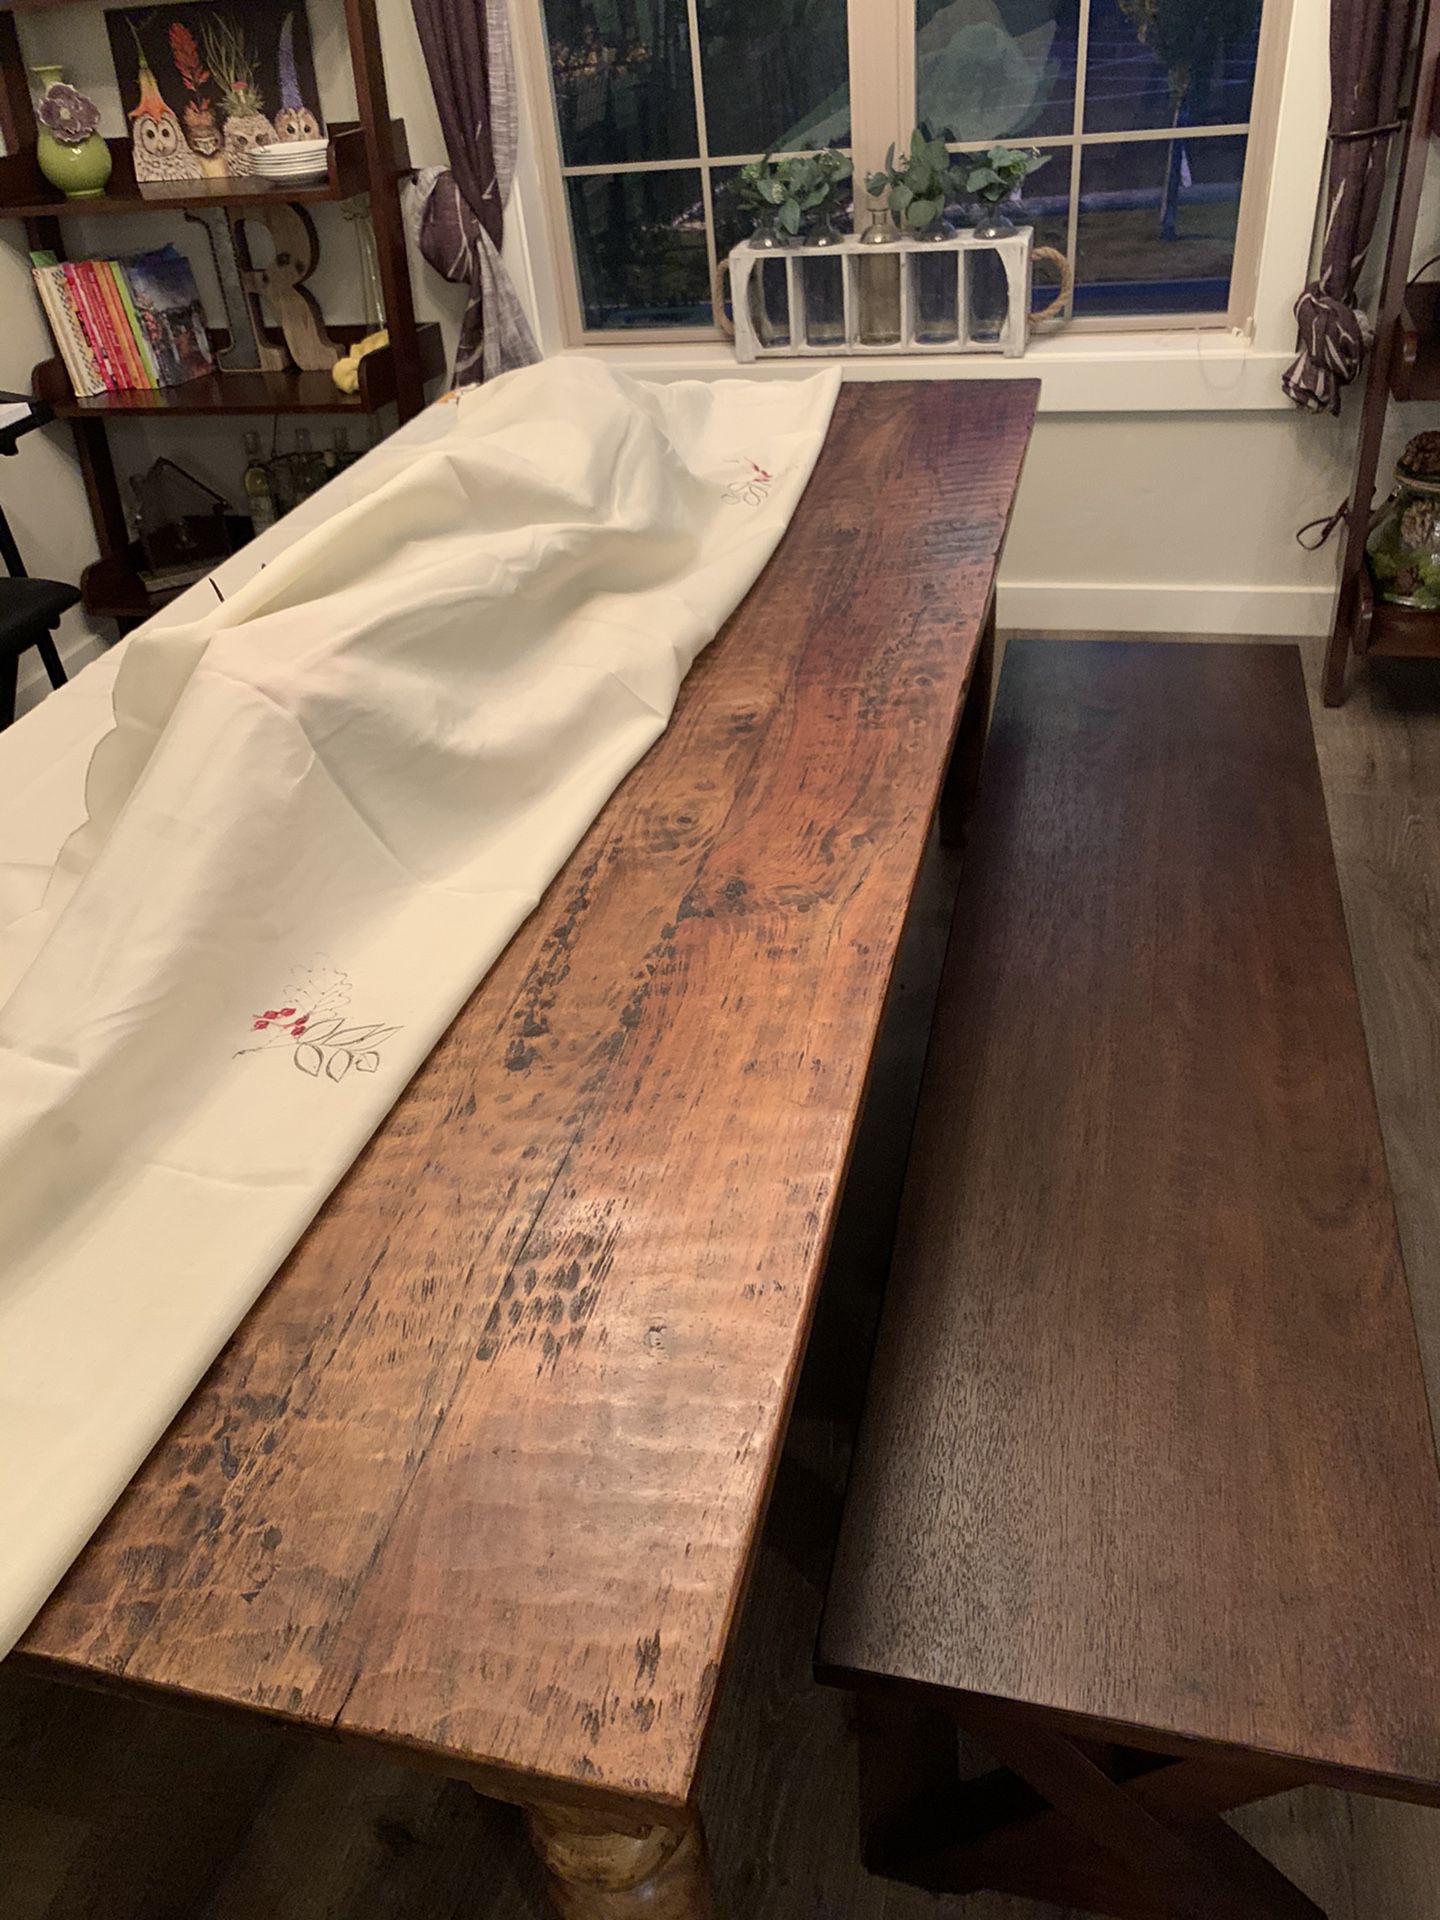 6 foot long dining table all wood with benches!